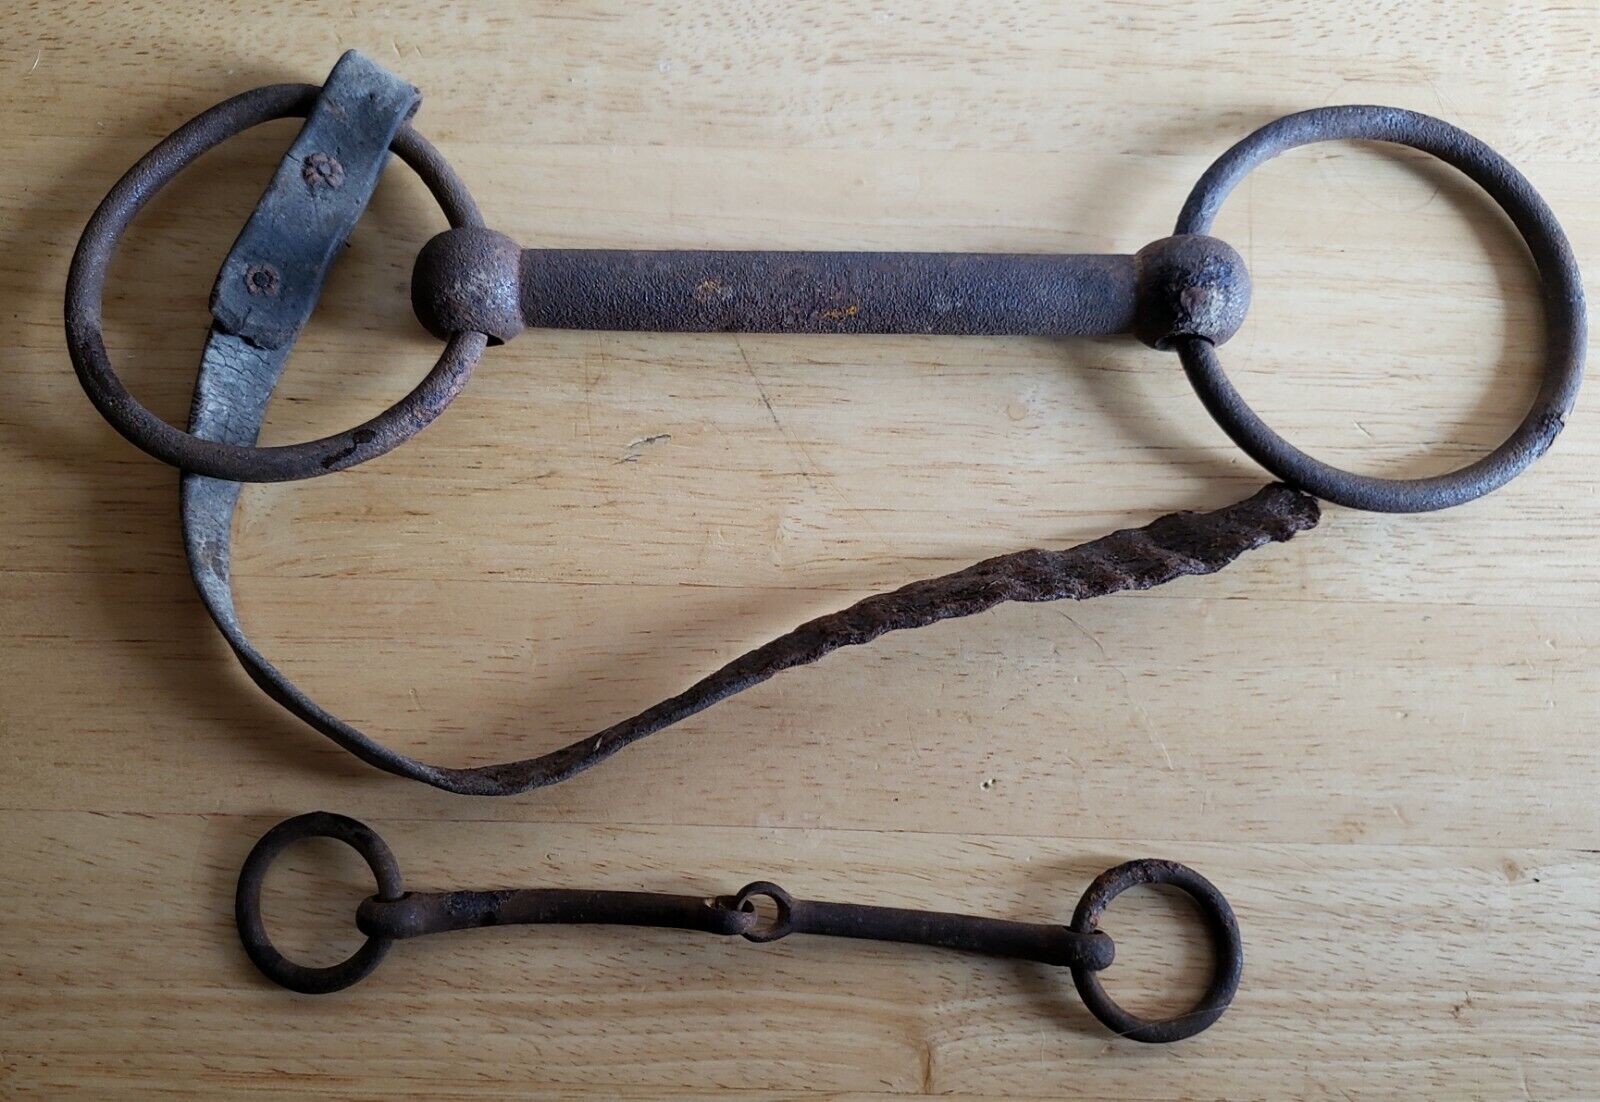 Bridle Bit Vintage Antique hand forged Western American horse tack.